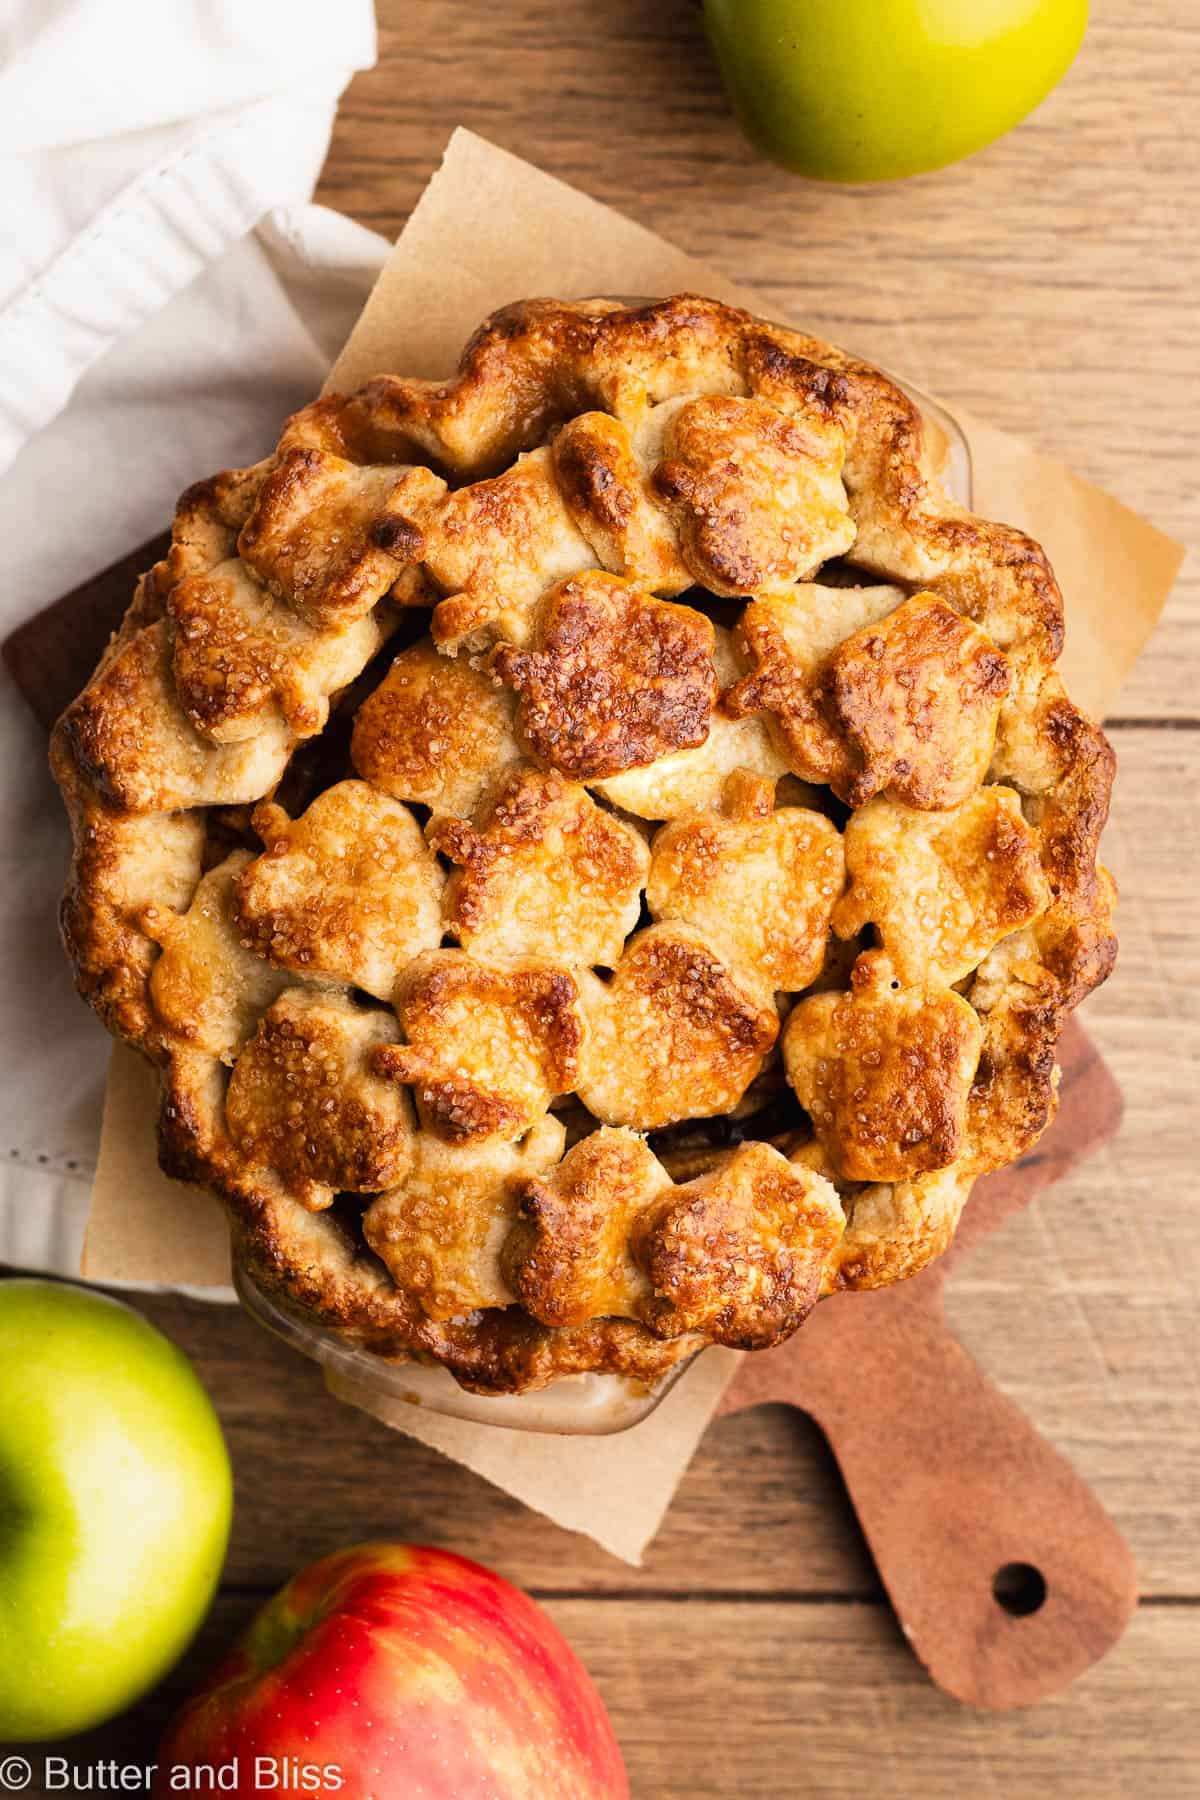 A freshly baked mini gluten free apple pie with apple cut-outs on a wood table.